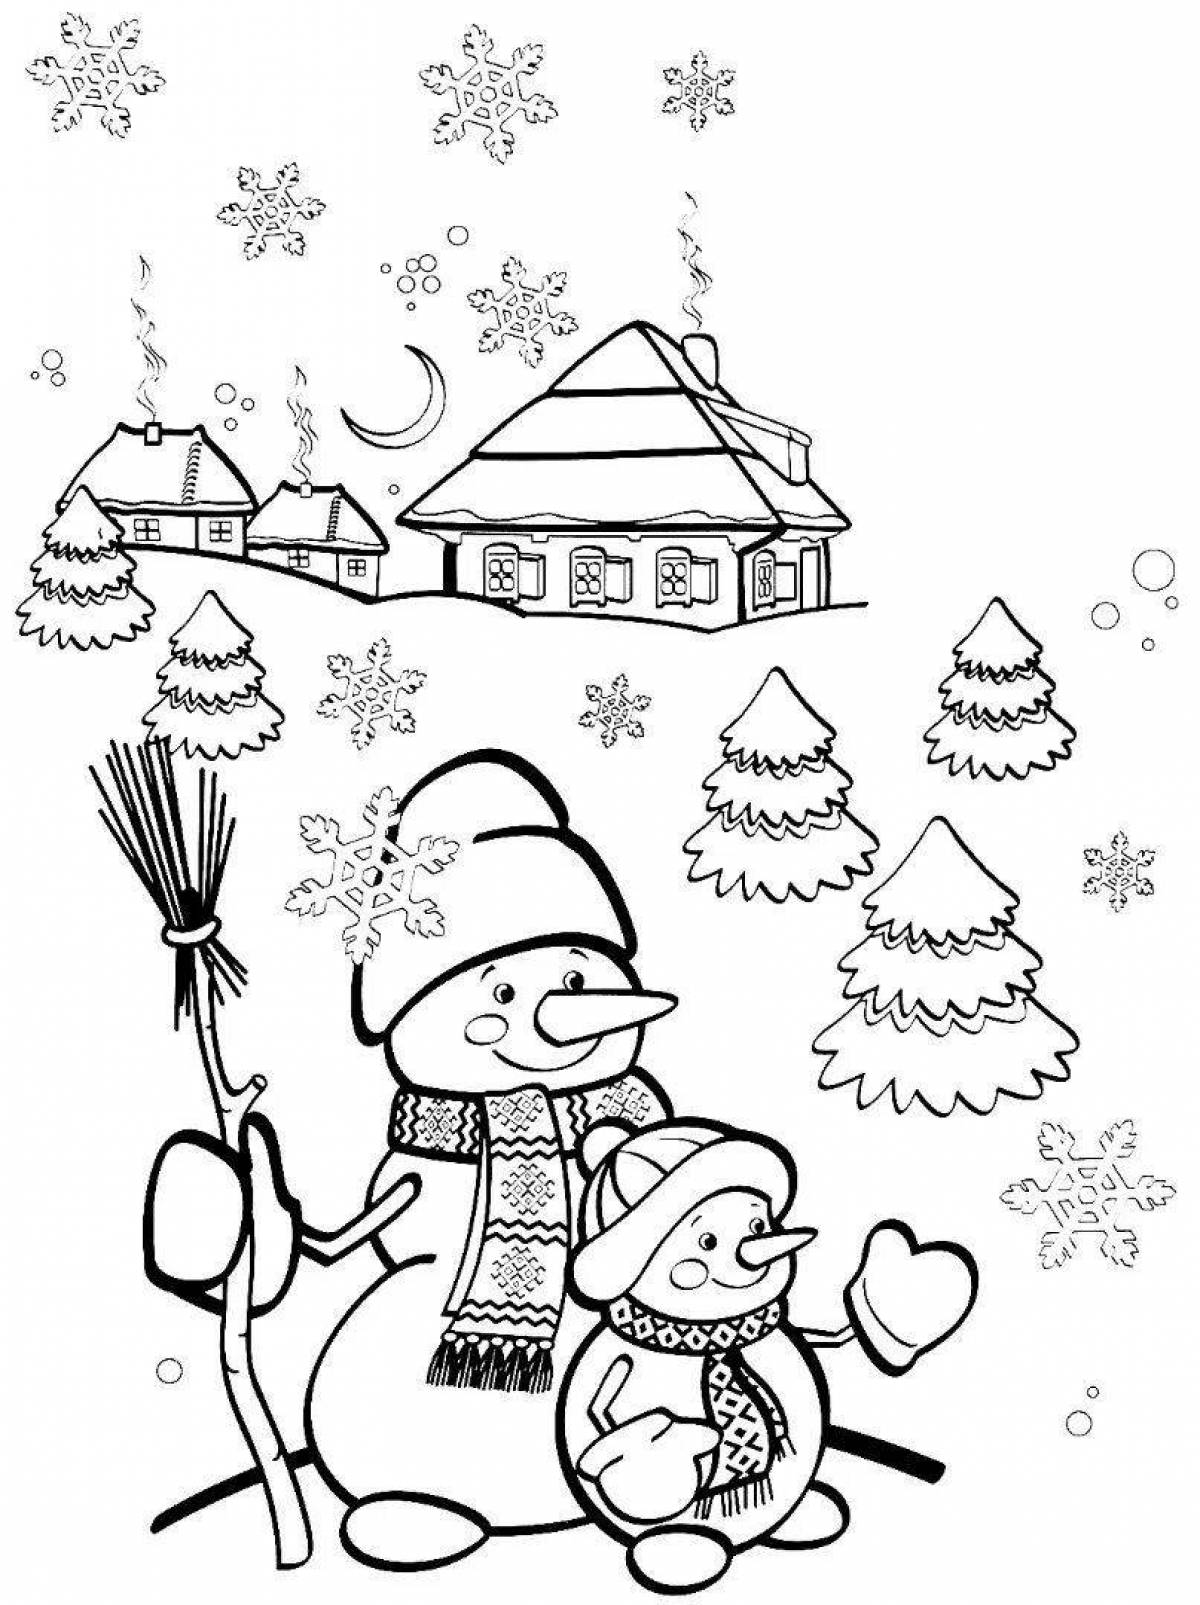 Merry winter Christmas coloring book